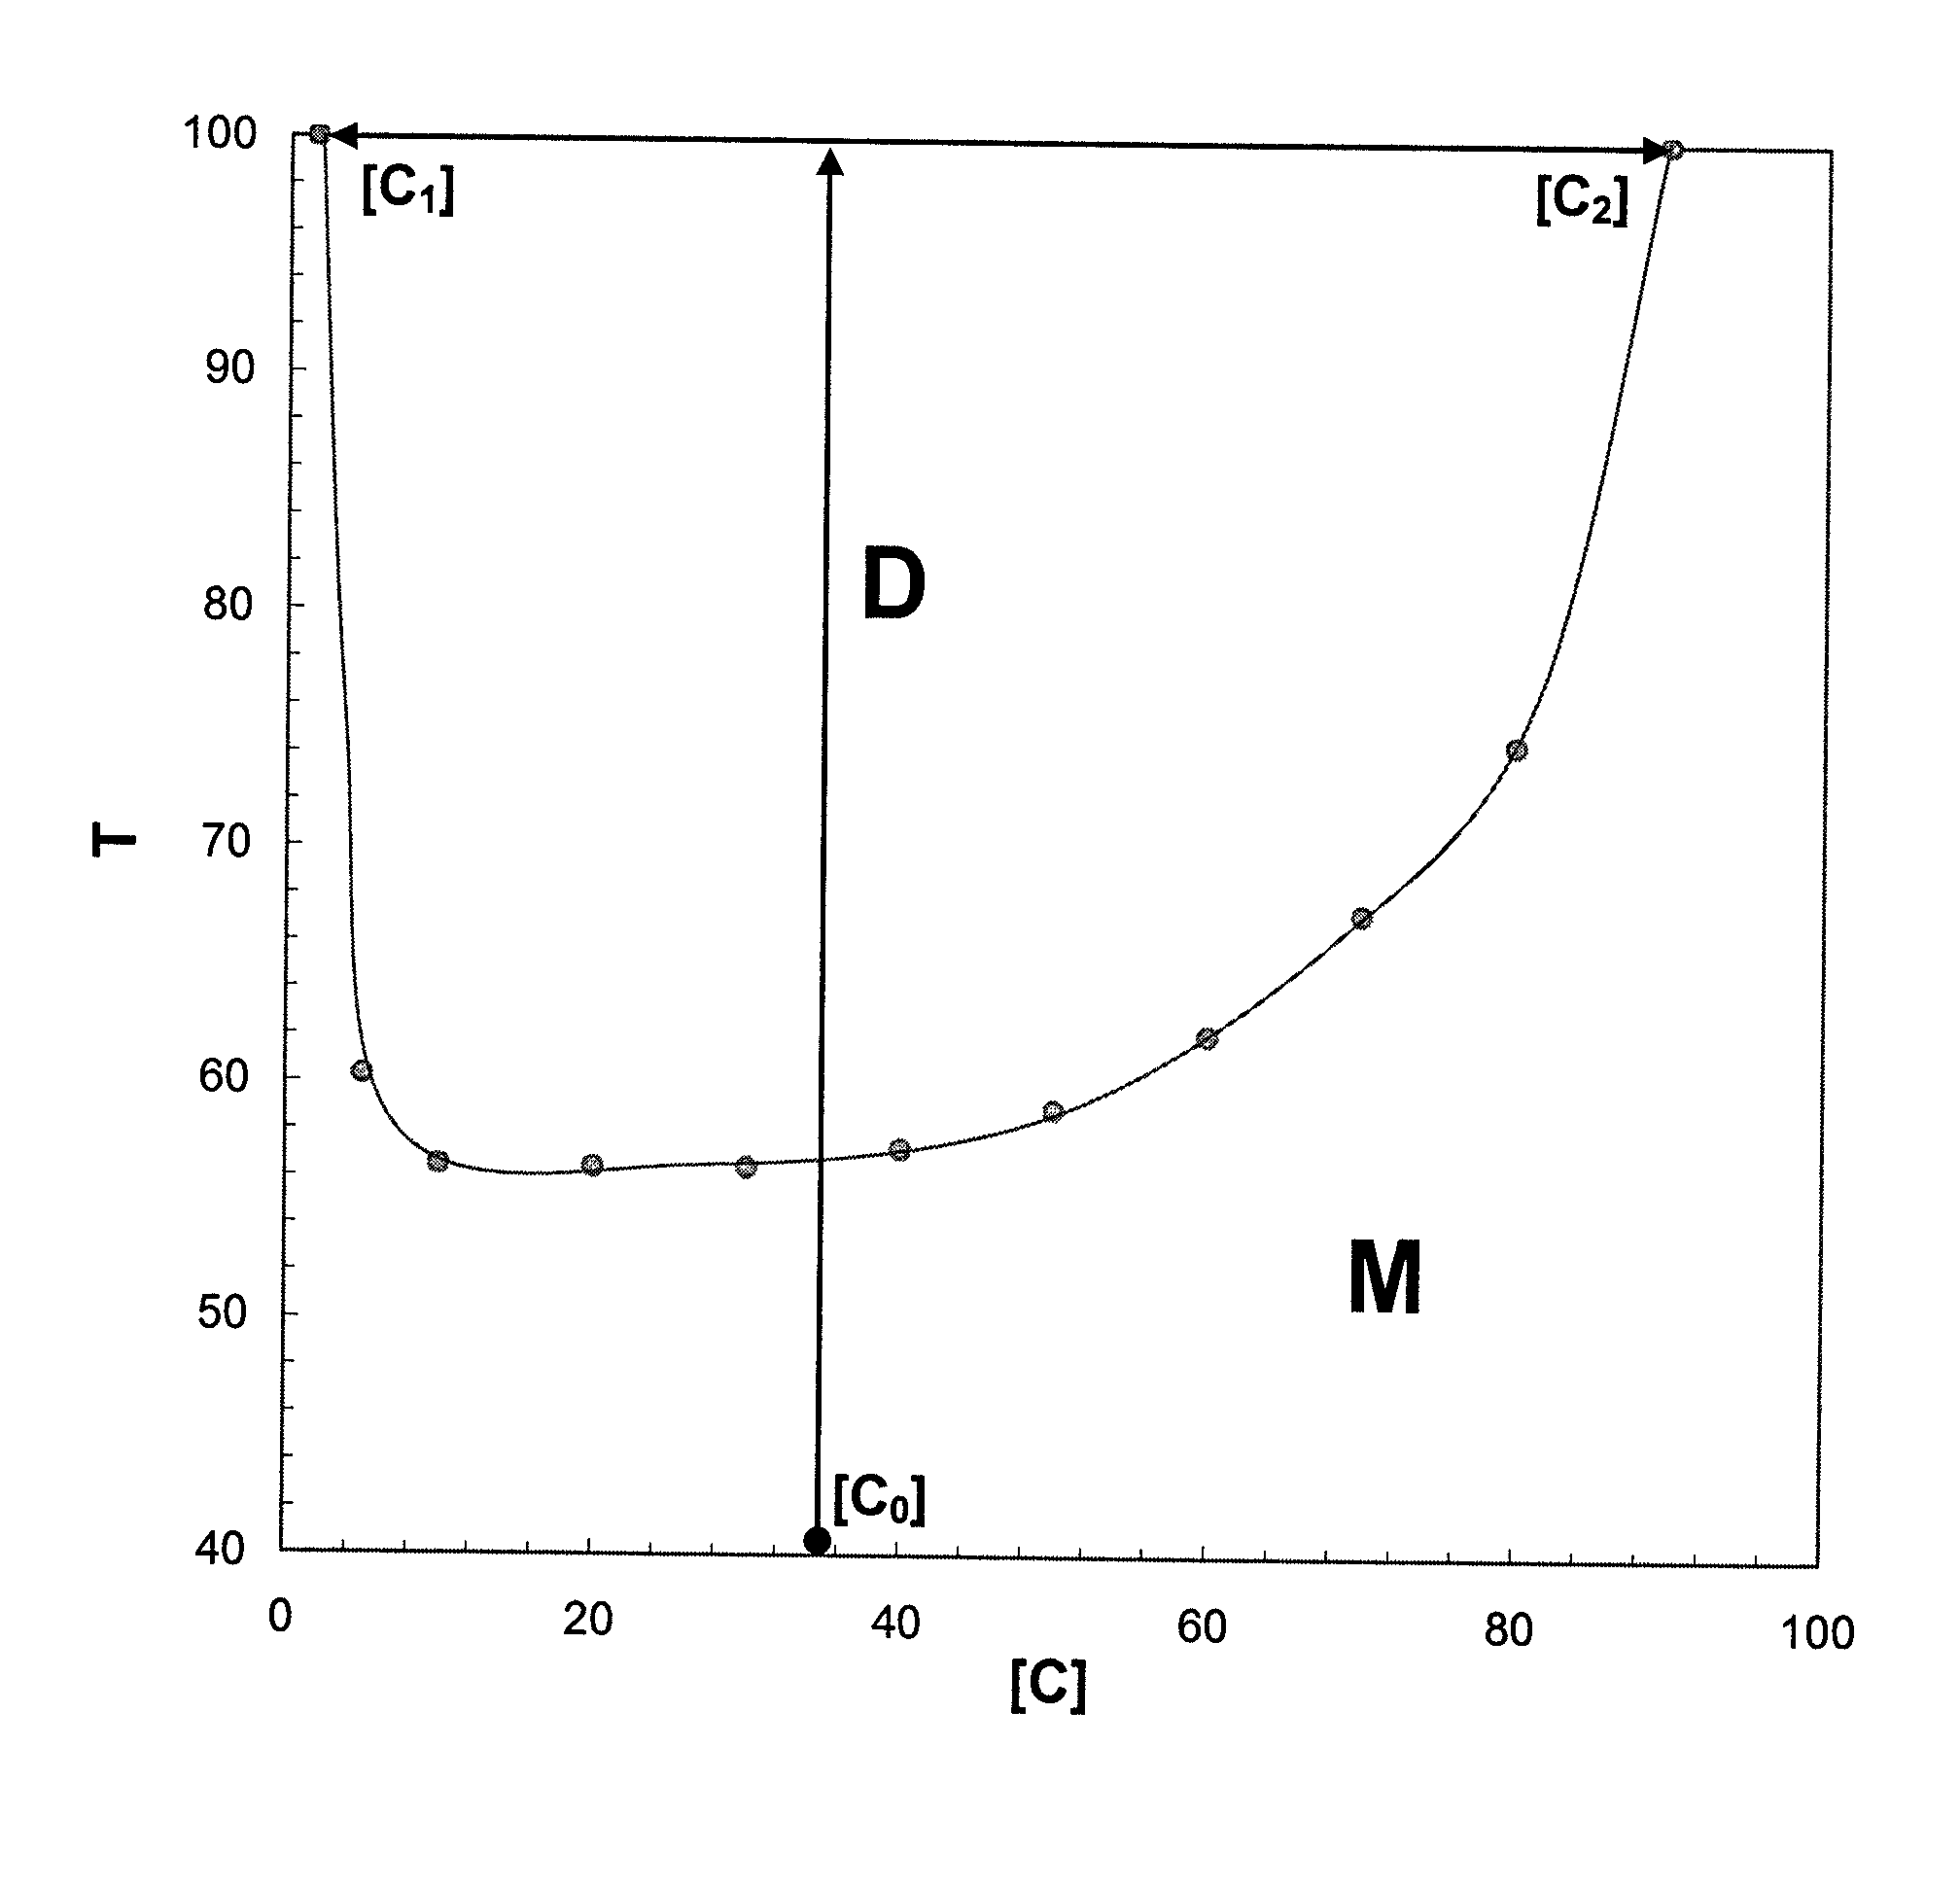 Gas deacidizing method using an absorbent solution with vaporization and/or purification of a fraction of the regenerated absorbent solution